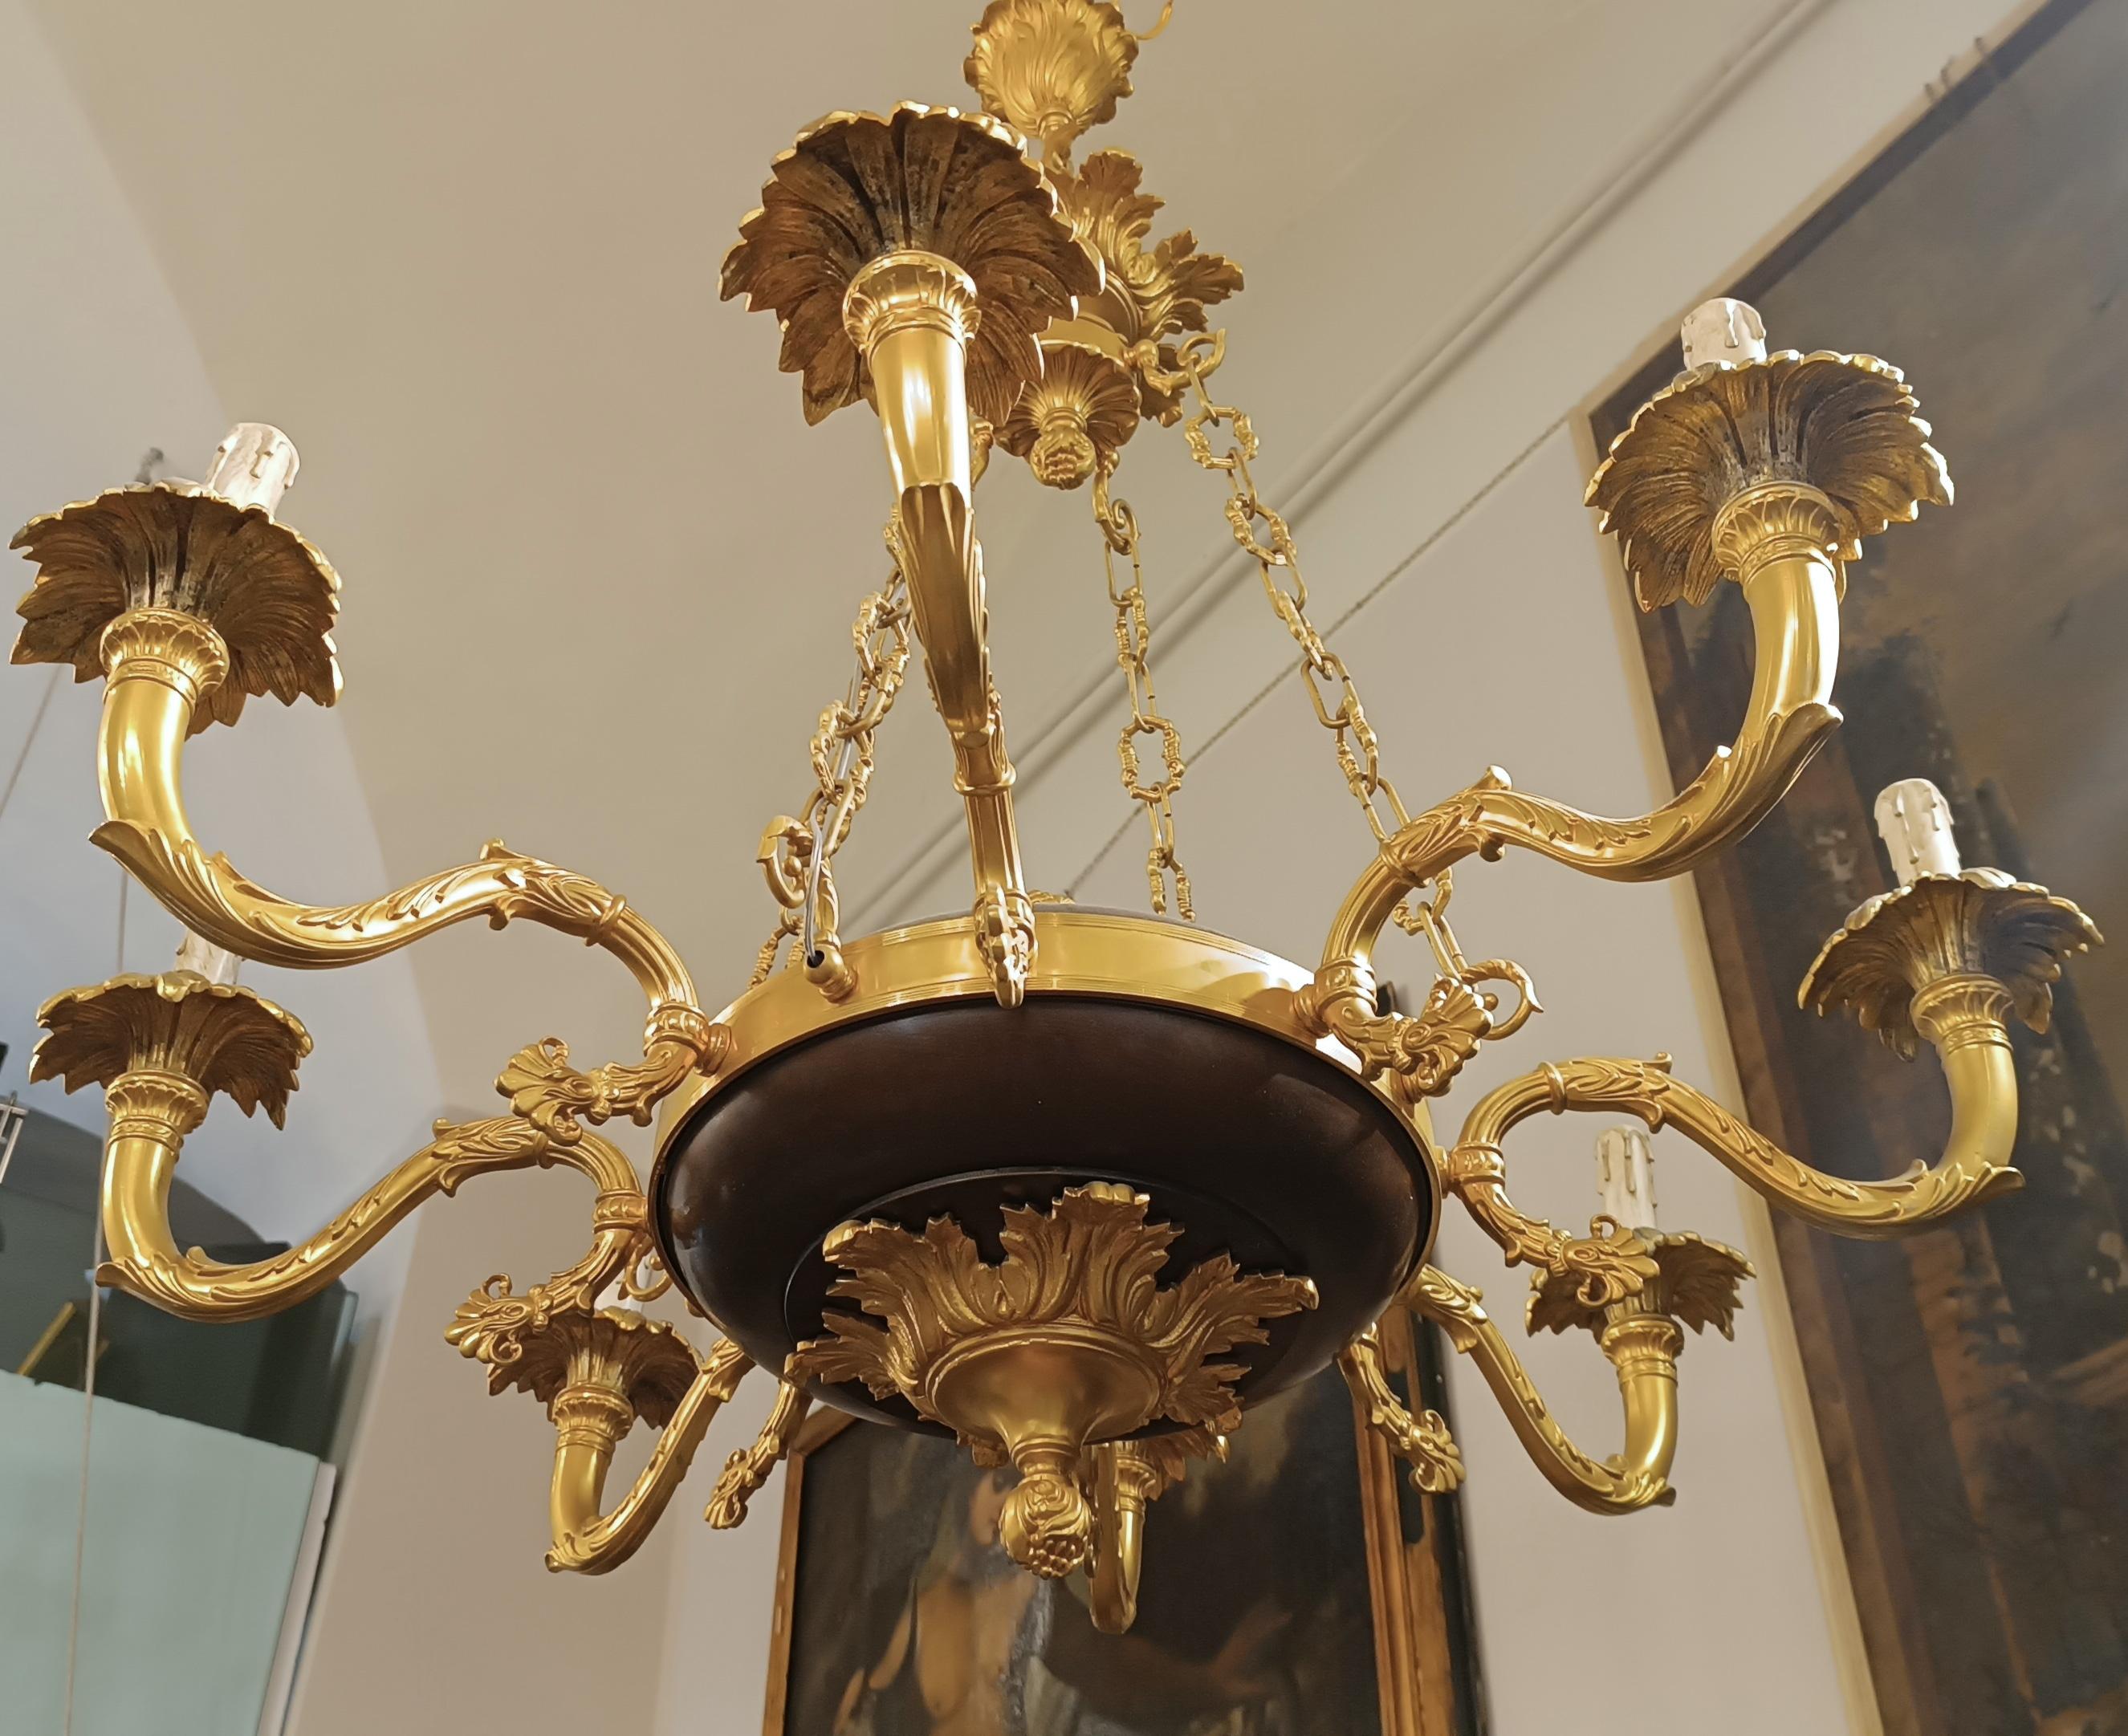 The lost wax cast bronze chandelier is an elegant and refined work that represents typical Florentine manufacturing from the second half of the 19th century. Its golden and chiseled surface also features parts in brown patina, which give a touch of